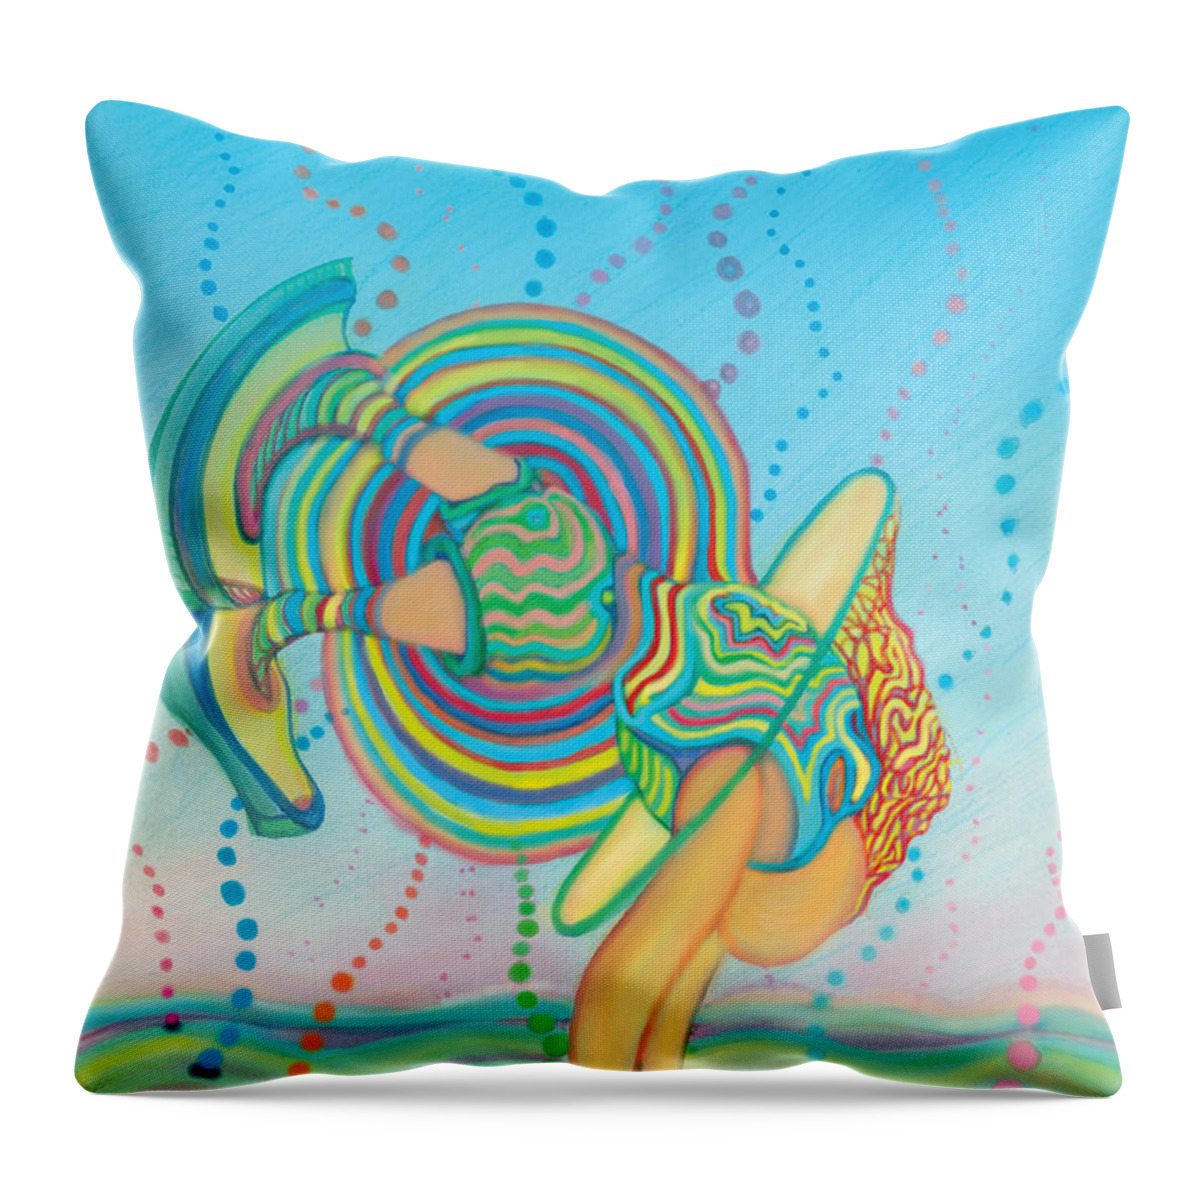  Throw Pillow featuring the digital art Quantum Leap #2 by Steven Kelly Smith